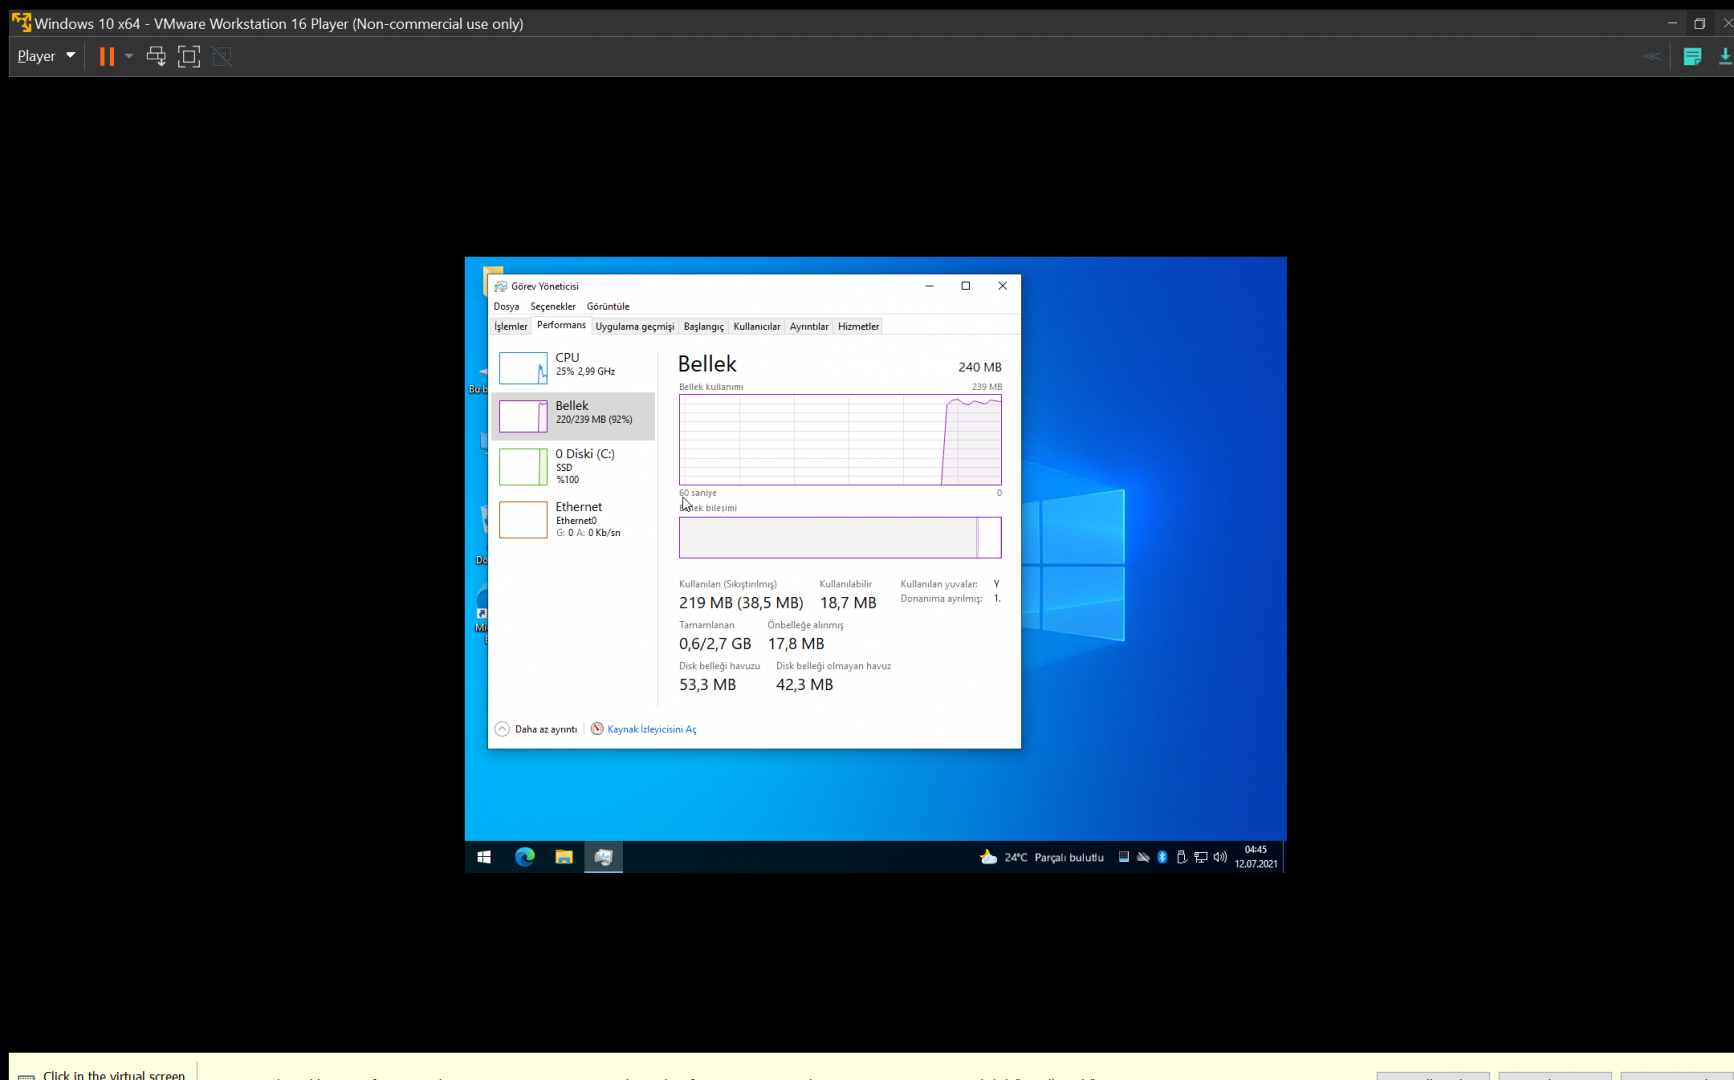 Windows 10 x64 - VMware Workstation 16 Player (Non-commercial use only) 12.07.2021 04_45_31.png